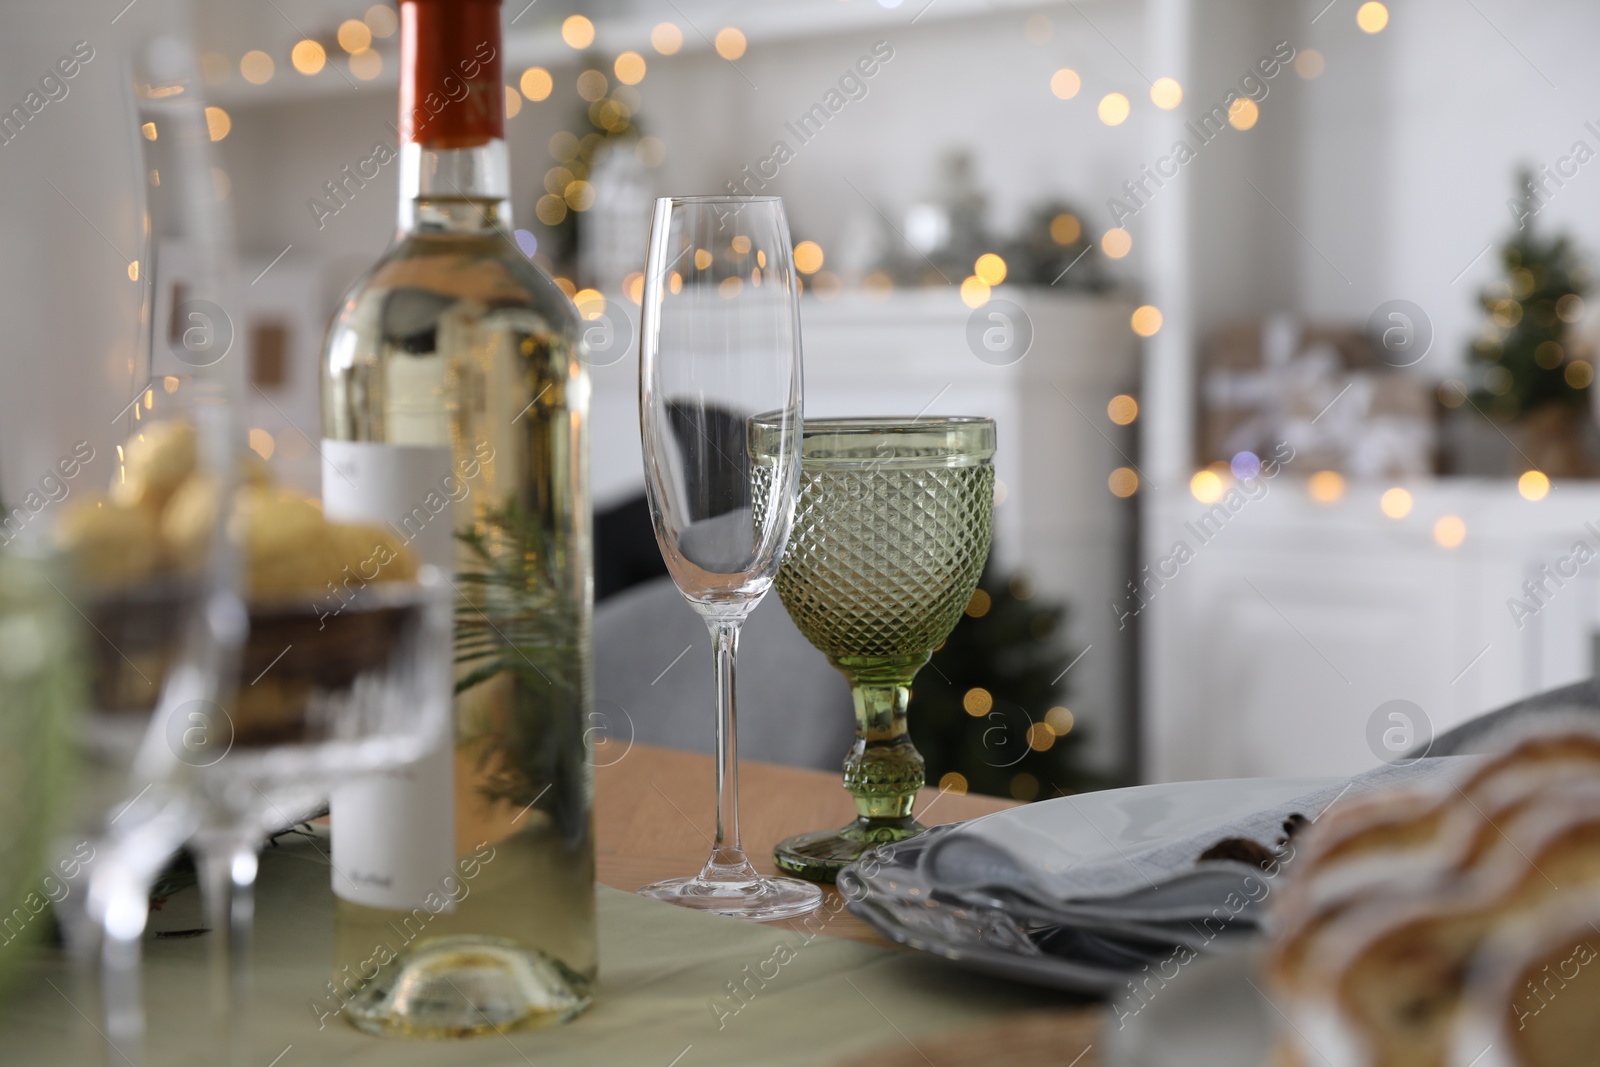 Photo of Christmas table setting with bottle of wine and dishware